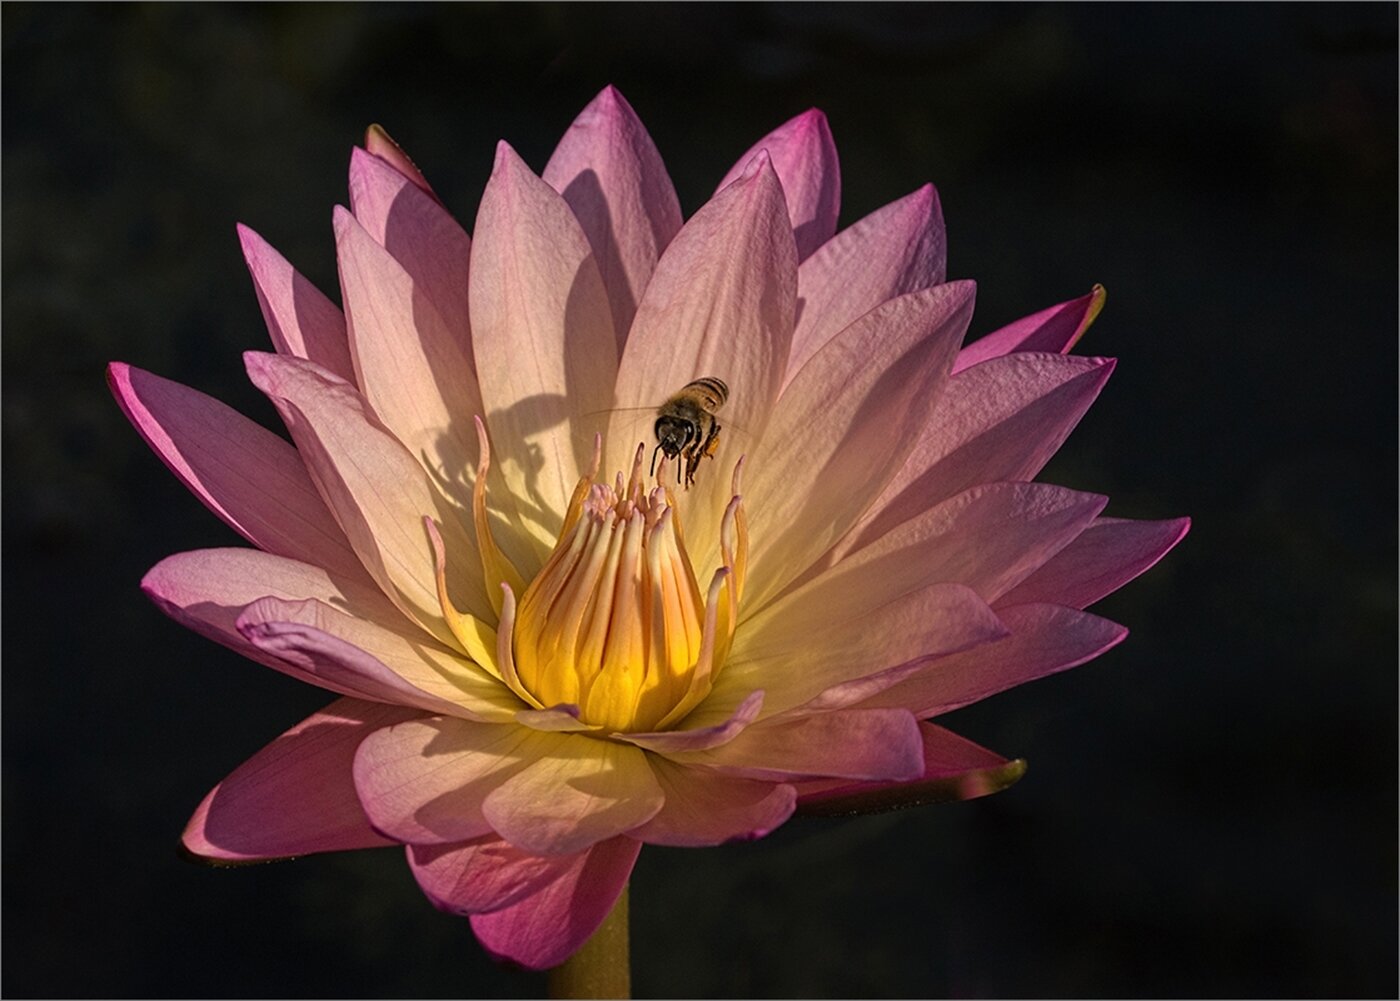  Waterlily and the Bee, Julie Cheng, Houston Photochrome Club, 1 HM 